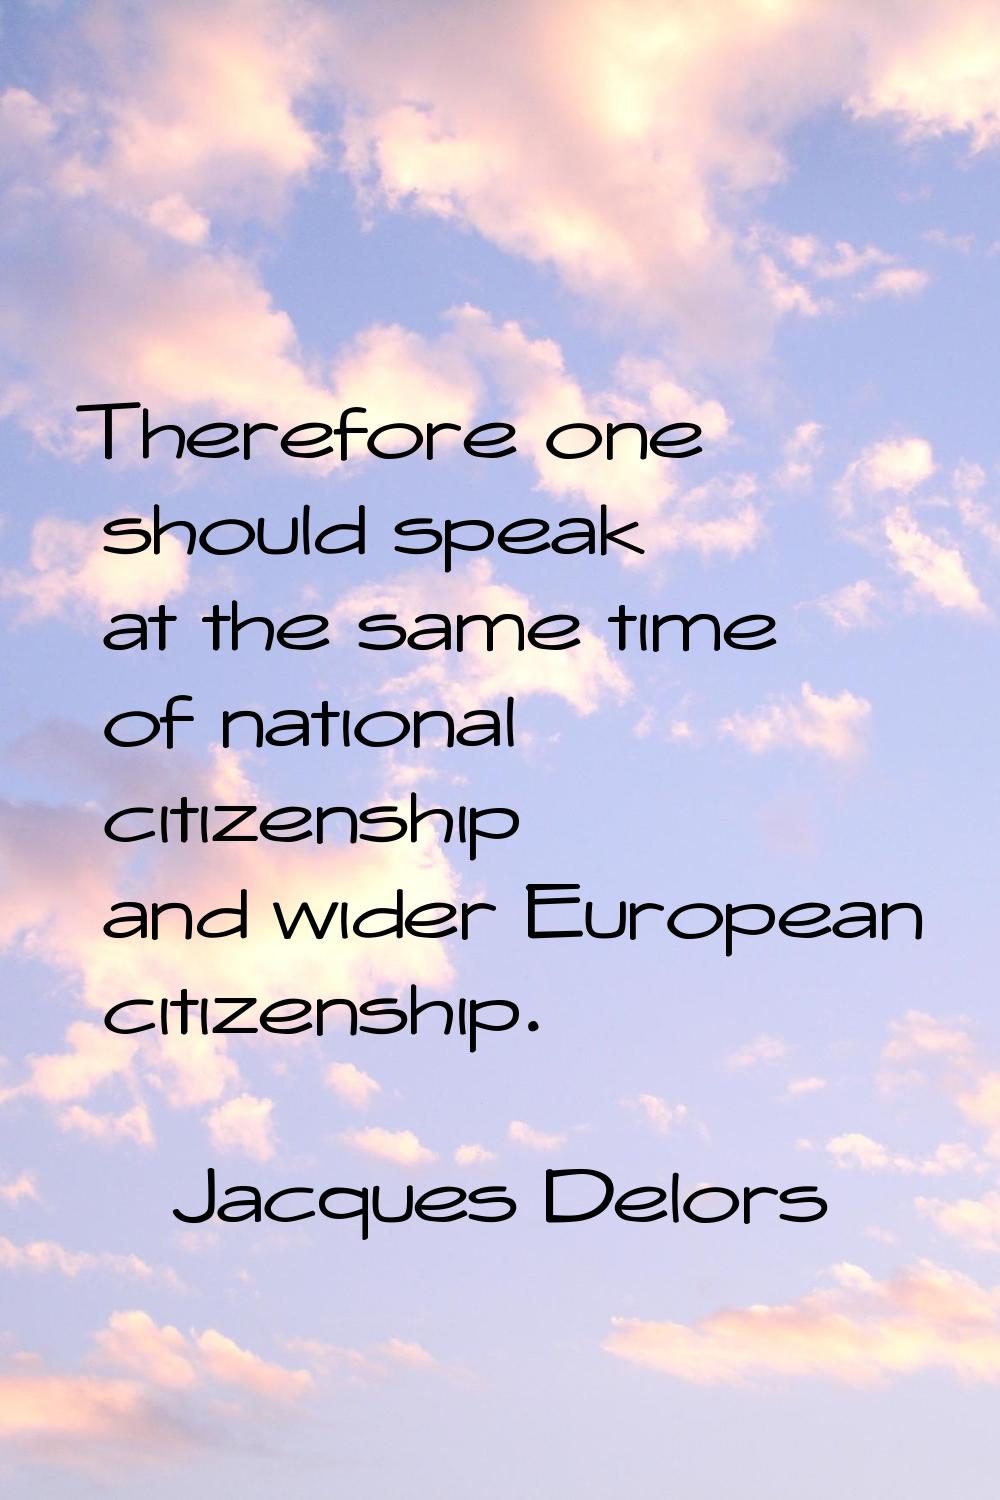 Therefore one should speak at the same time of national citizenship and wider European citizenship.